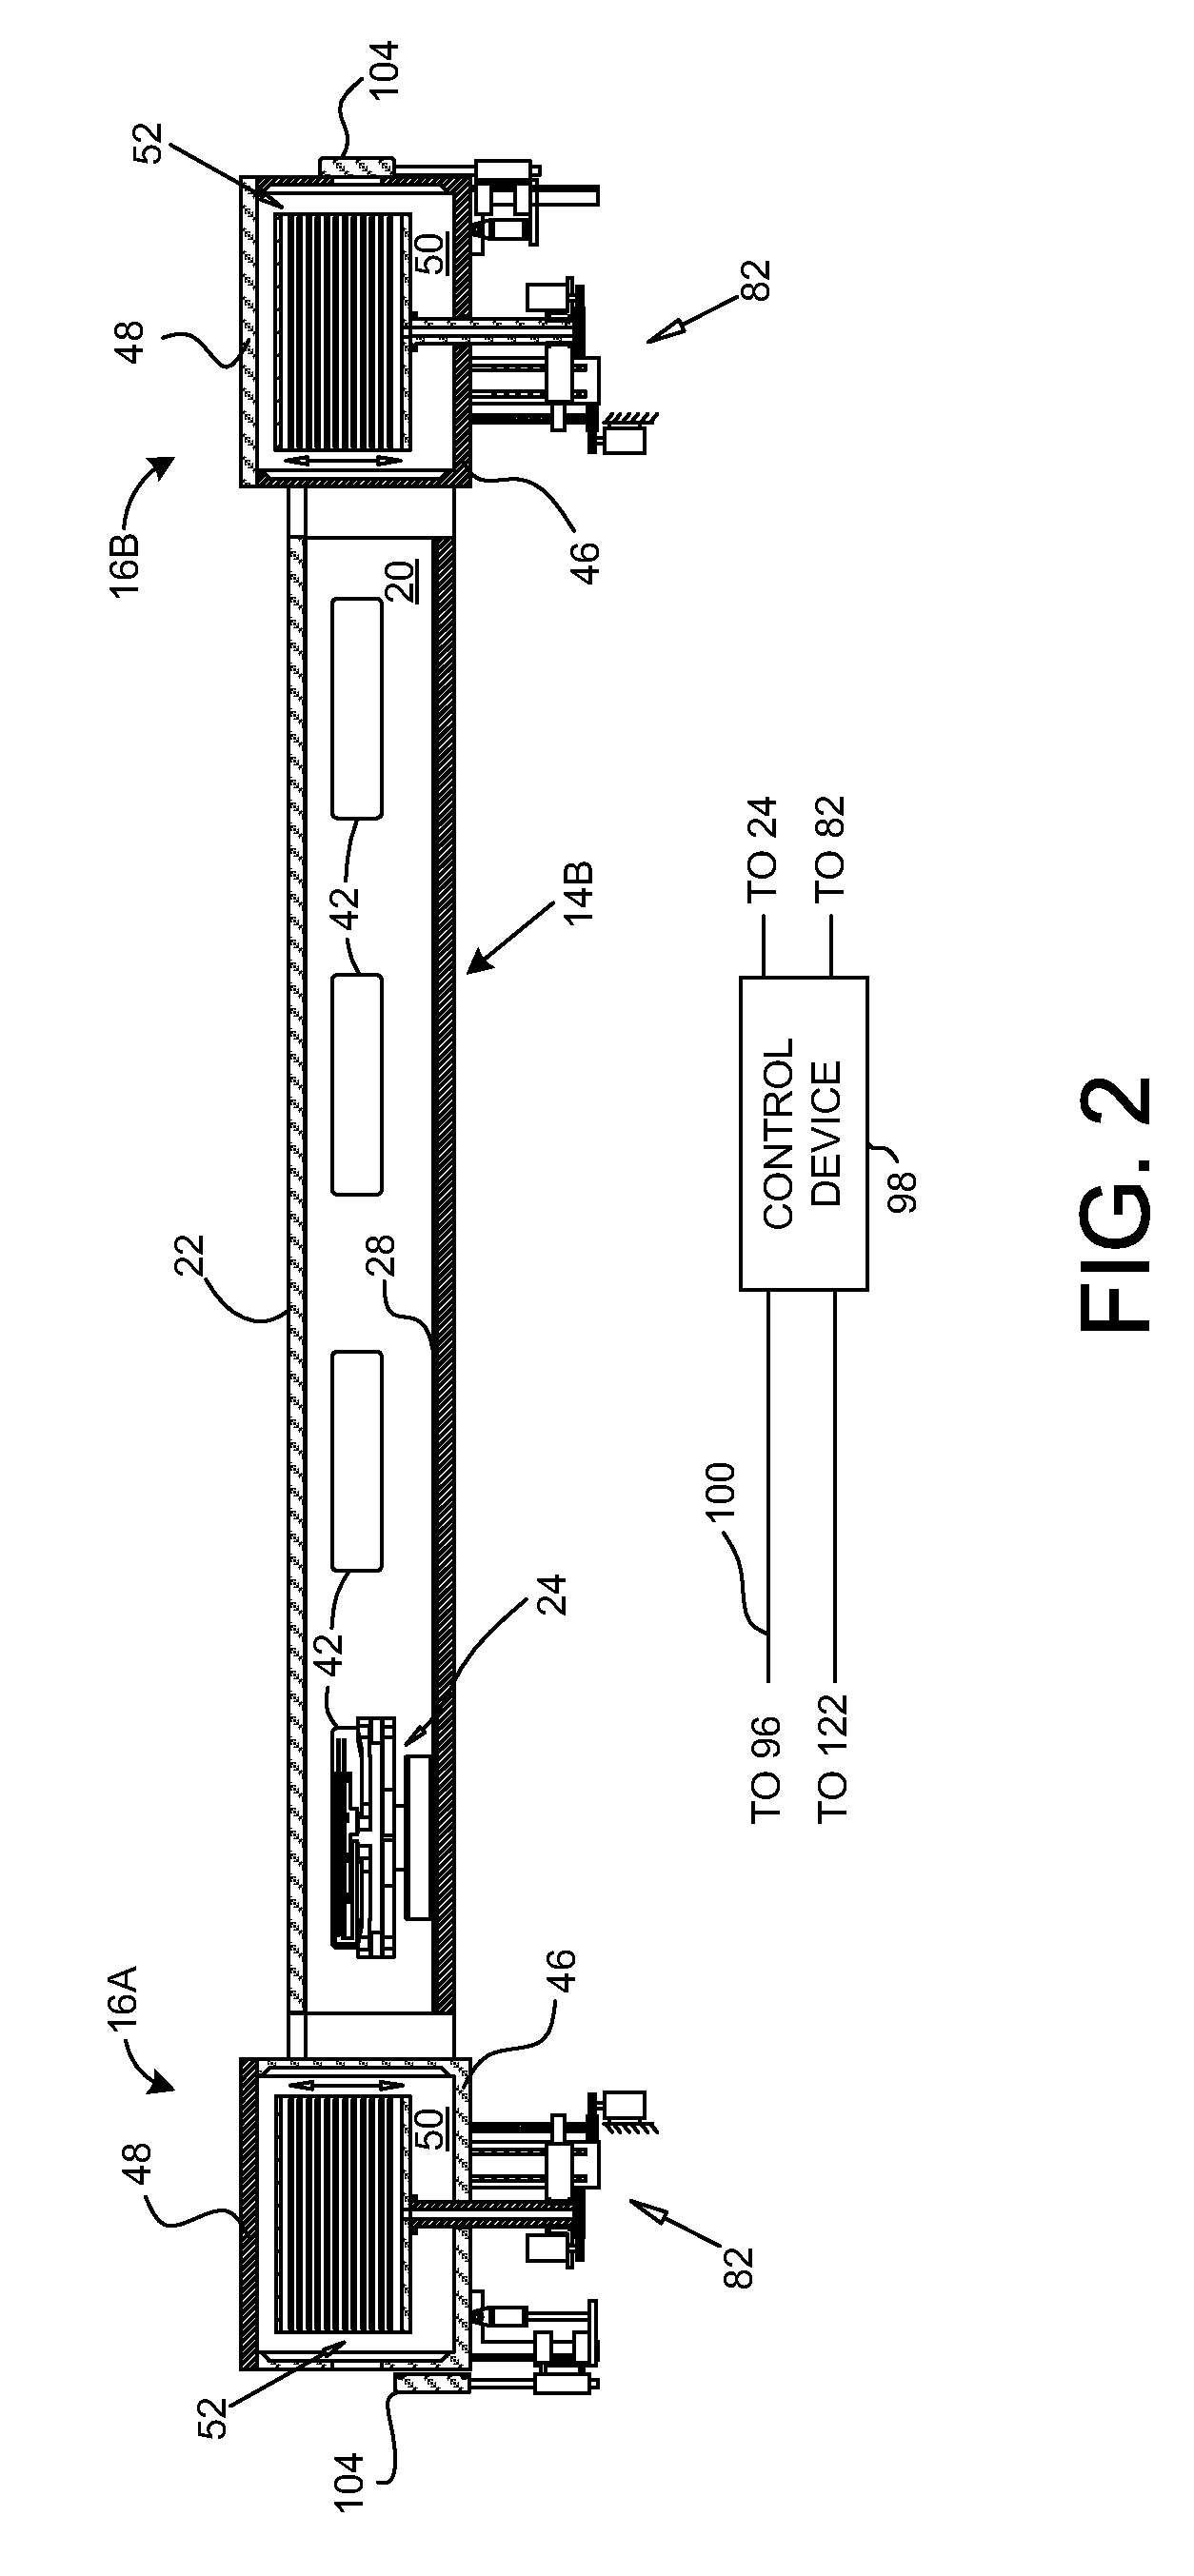 Apparatus and method for processing substrates using one or more vacuum transfer chamber units